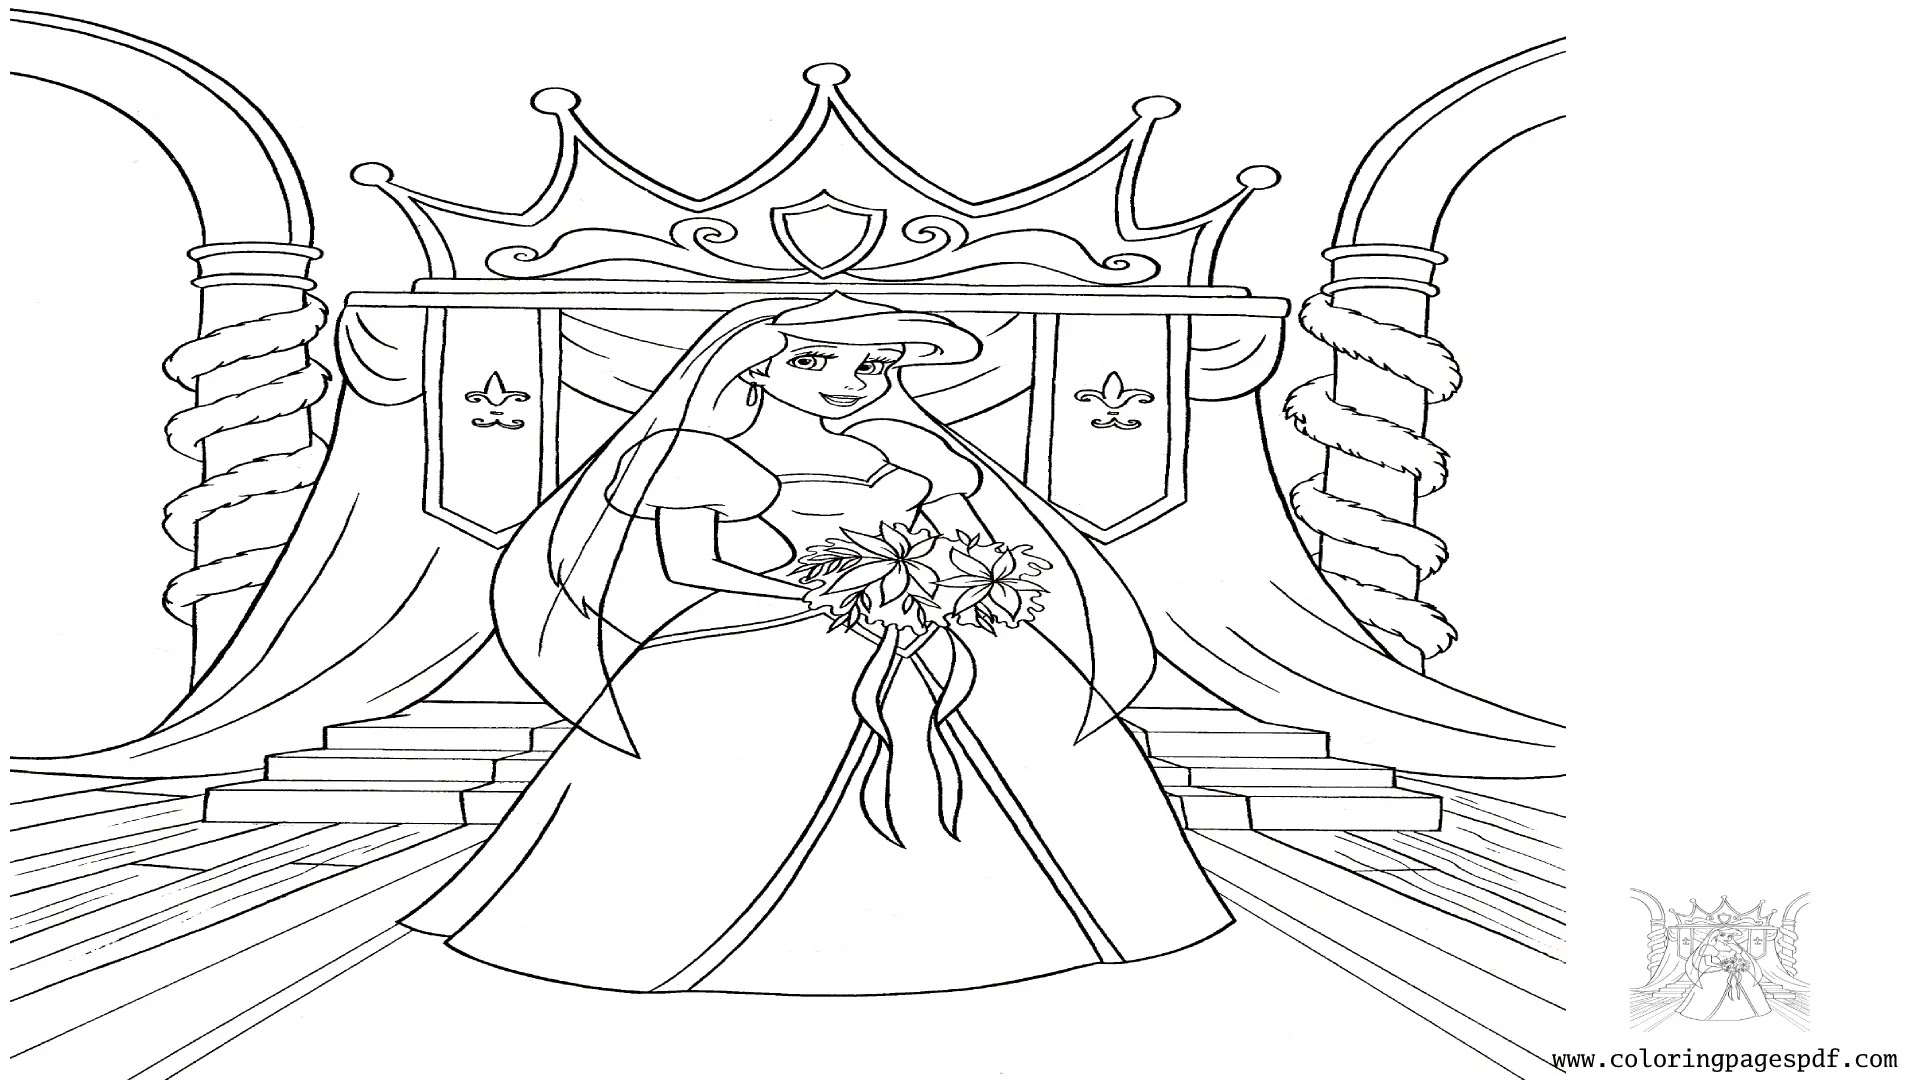 Coloring Page Of A Princess In Front Of The Throne